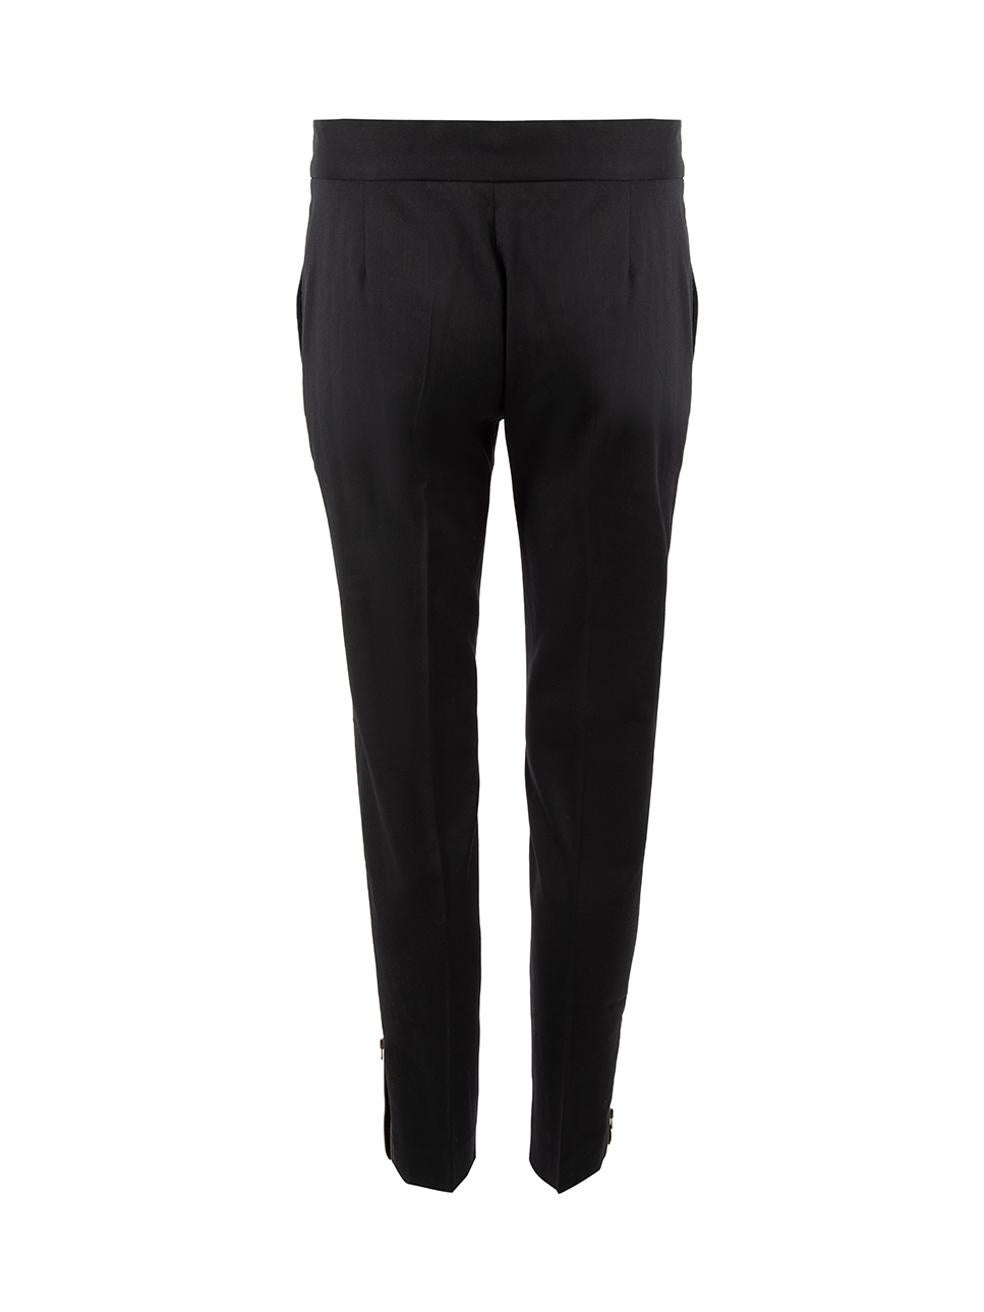 Stella McCartney Women's Black Slim Fit Trousers with Zip Details In Good Condition For Sale In London, GB